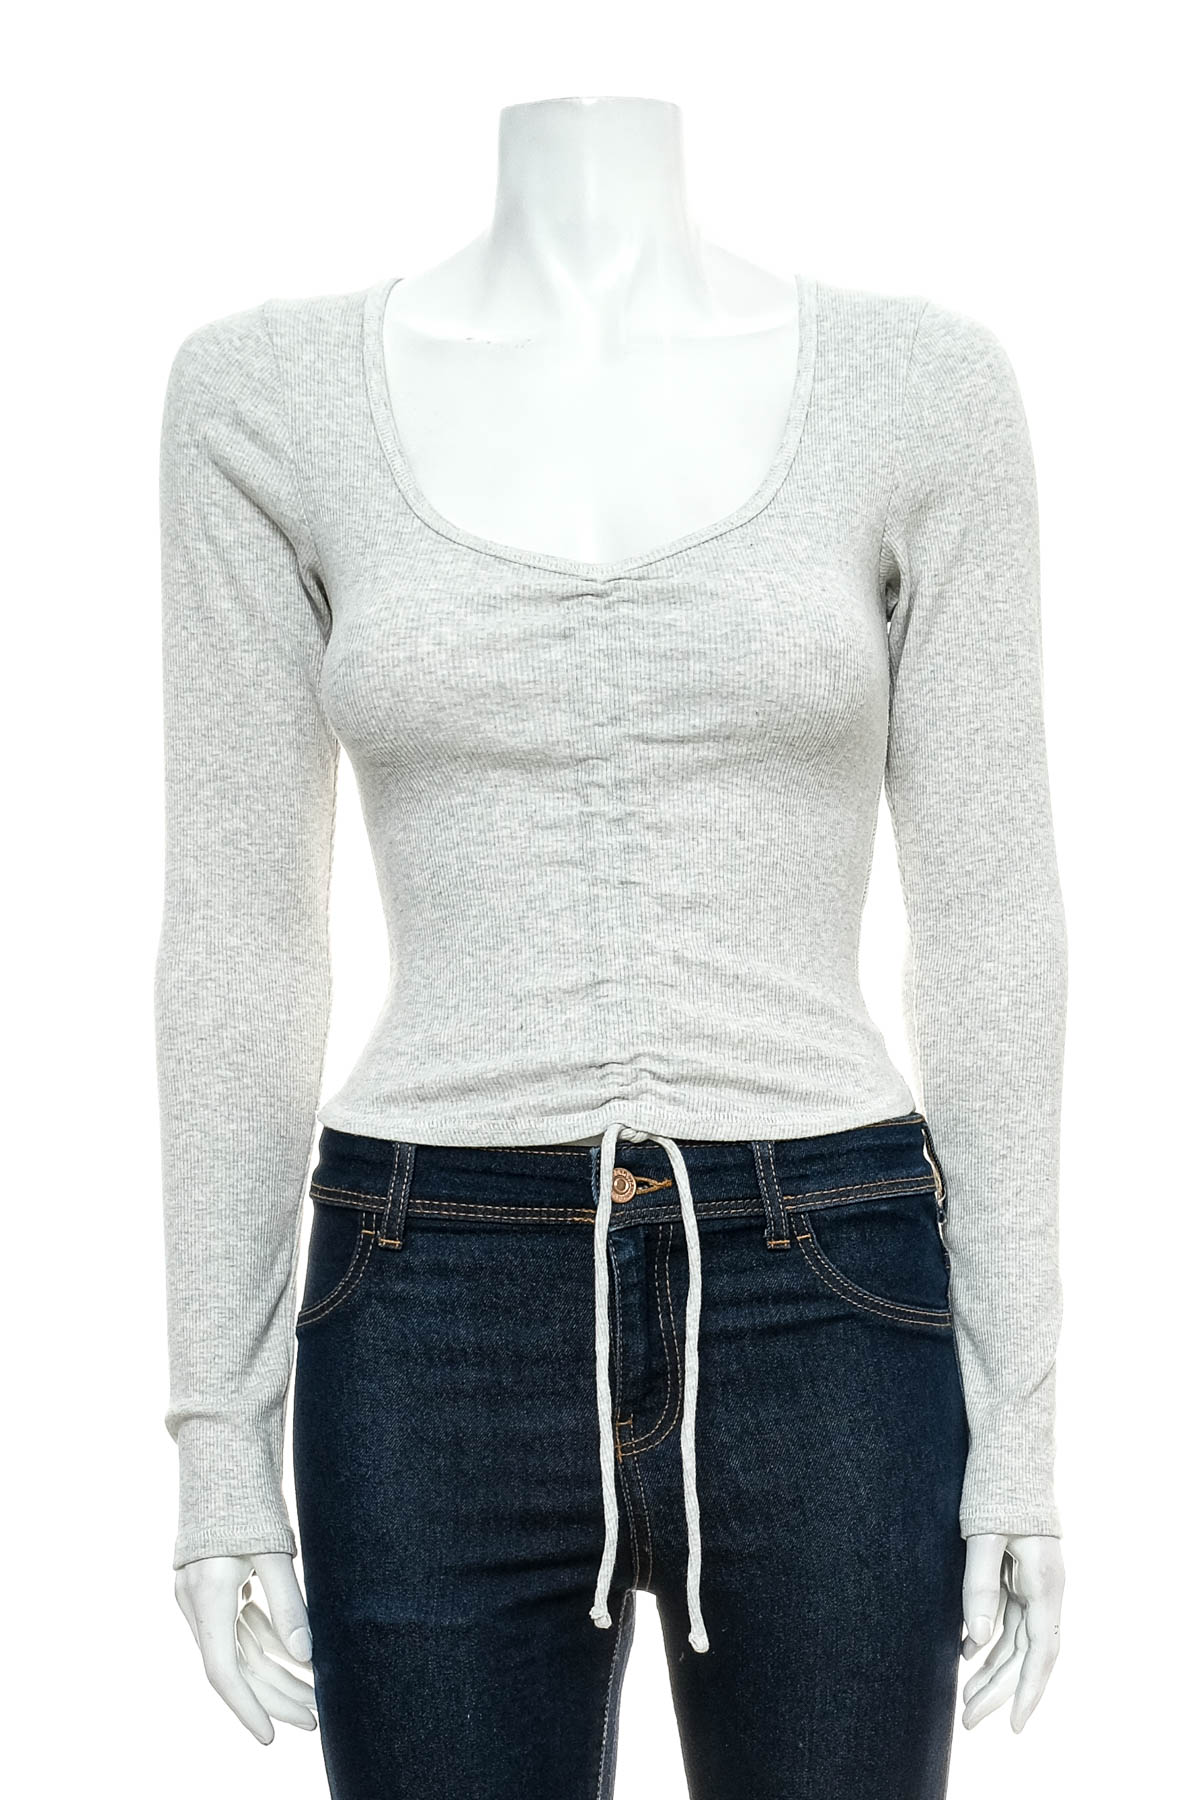 Women's blouse - Abercrombie & Fitch - 0